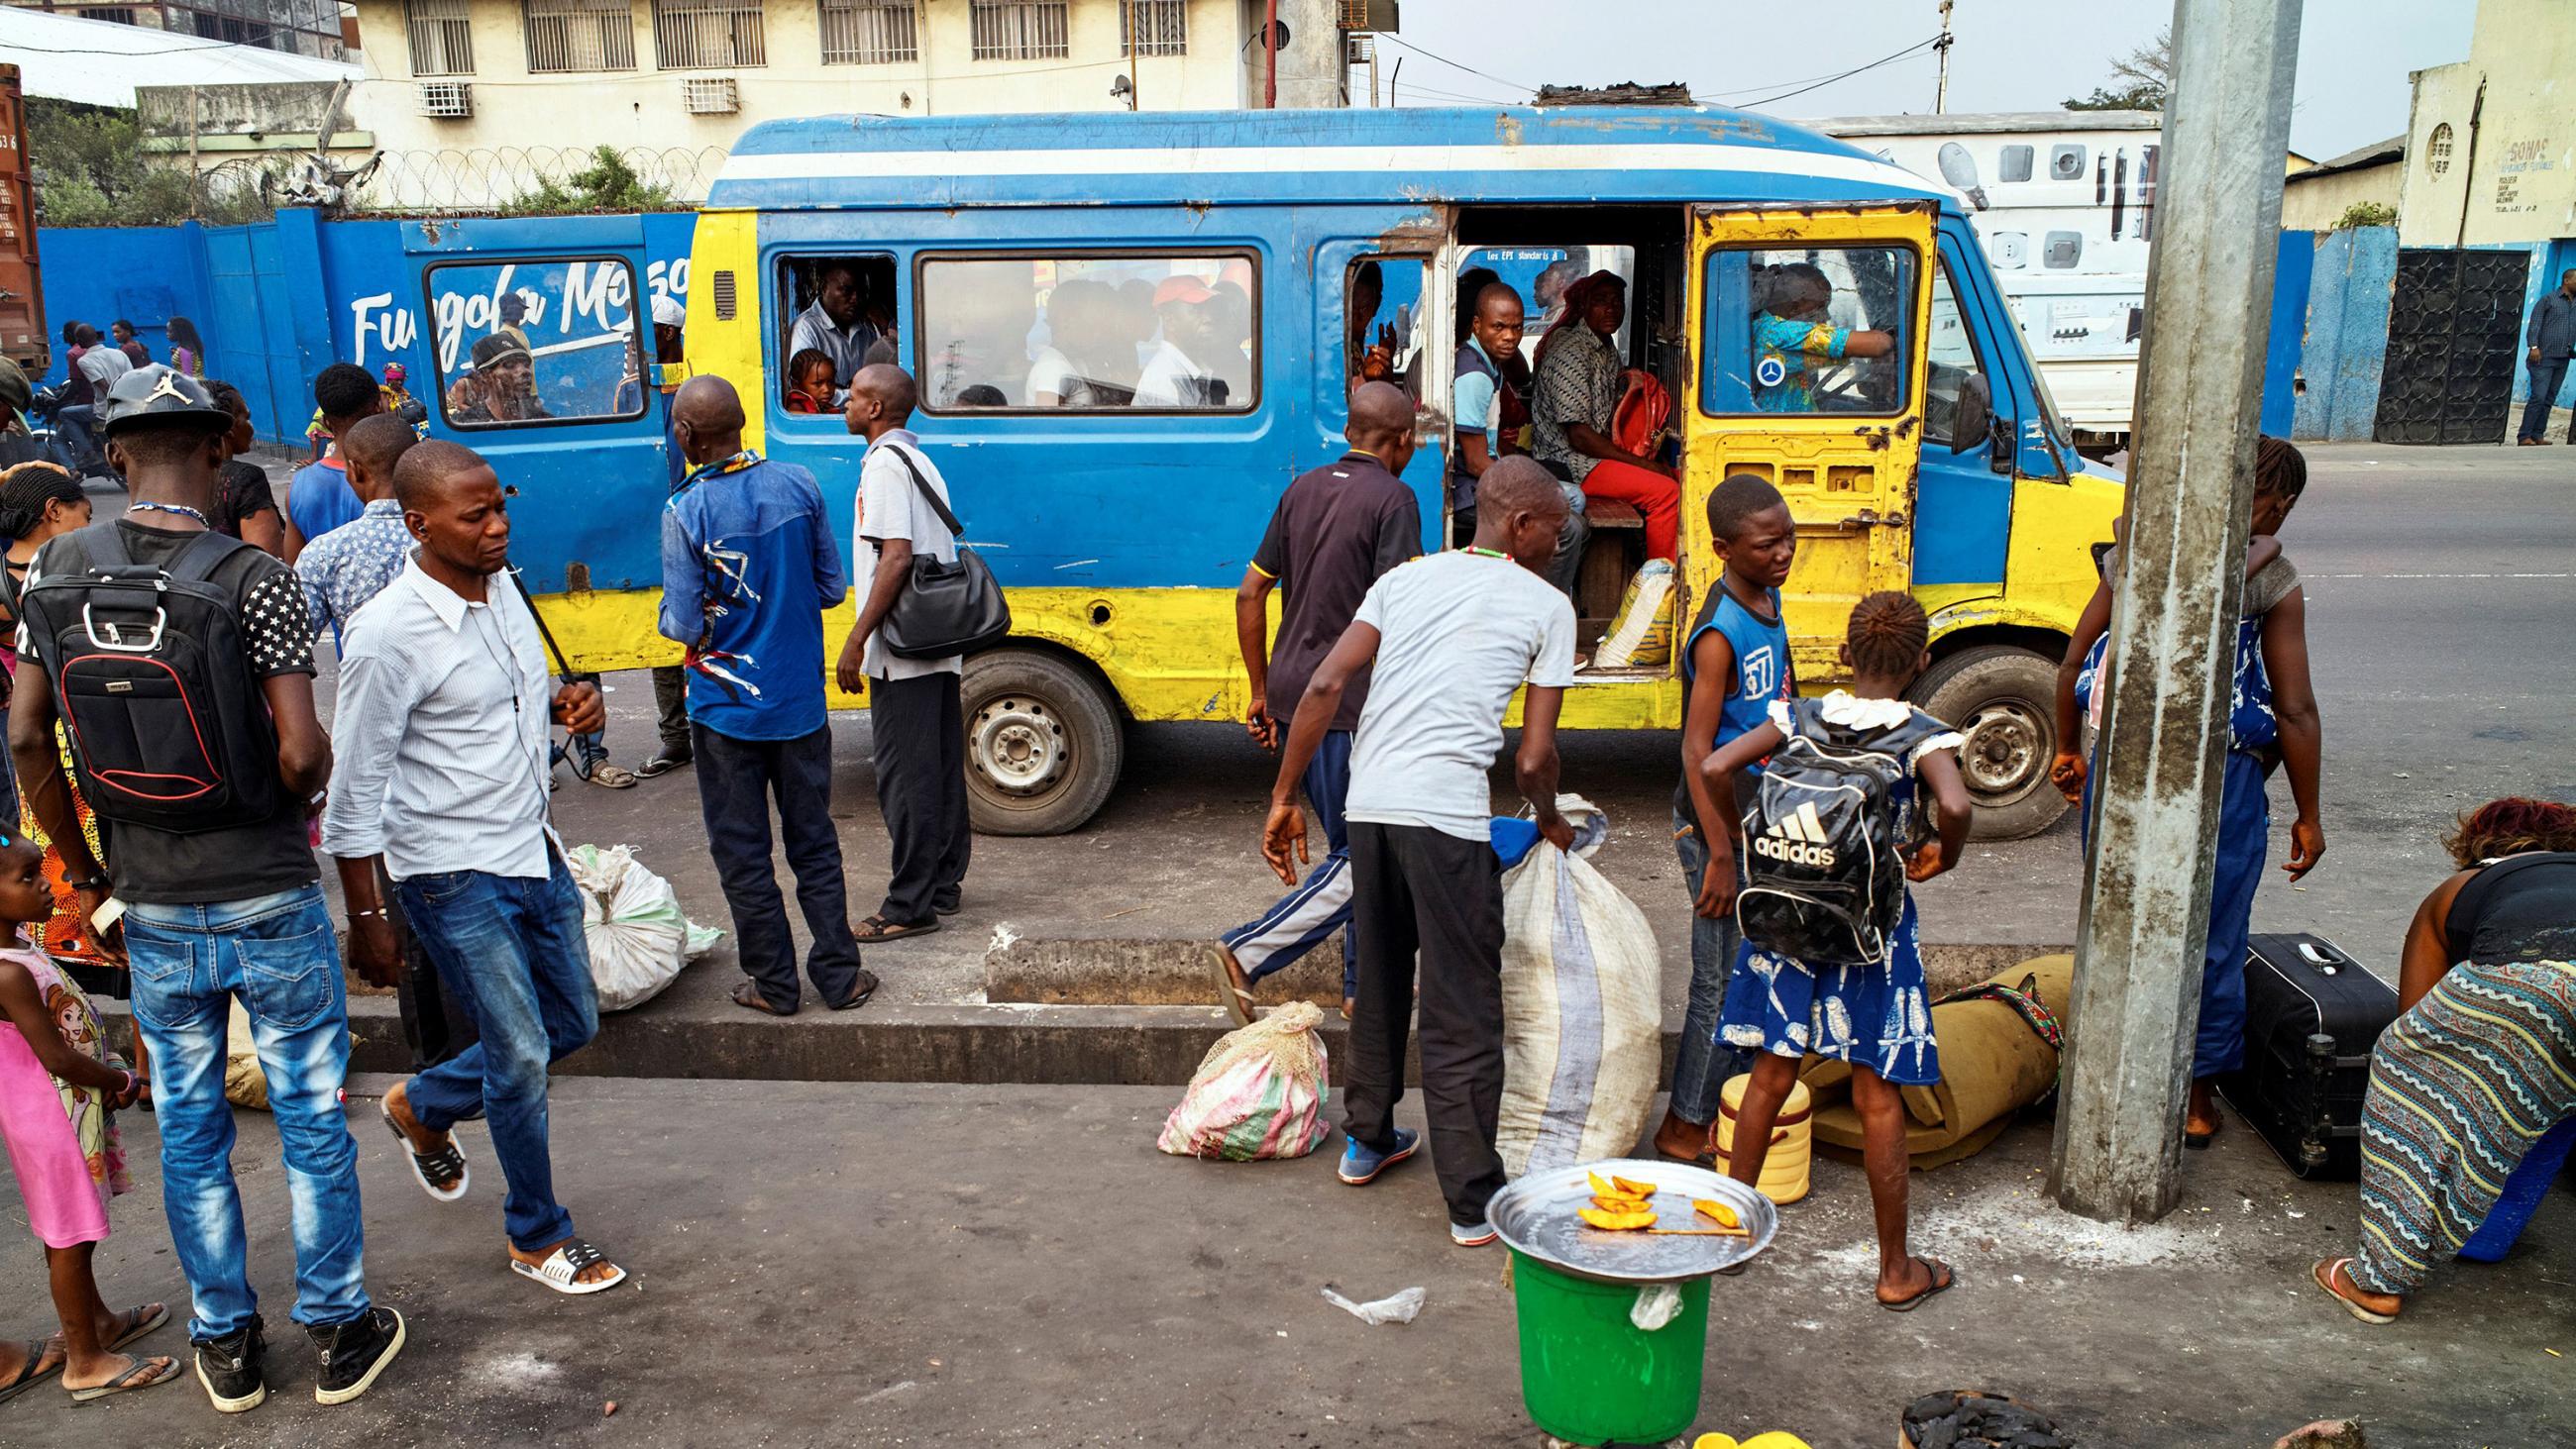 The photo shows a bustling street scene with several people boarding a blue bus. 